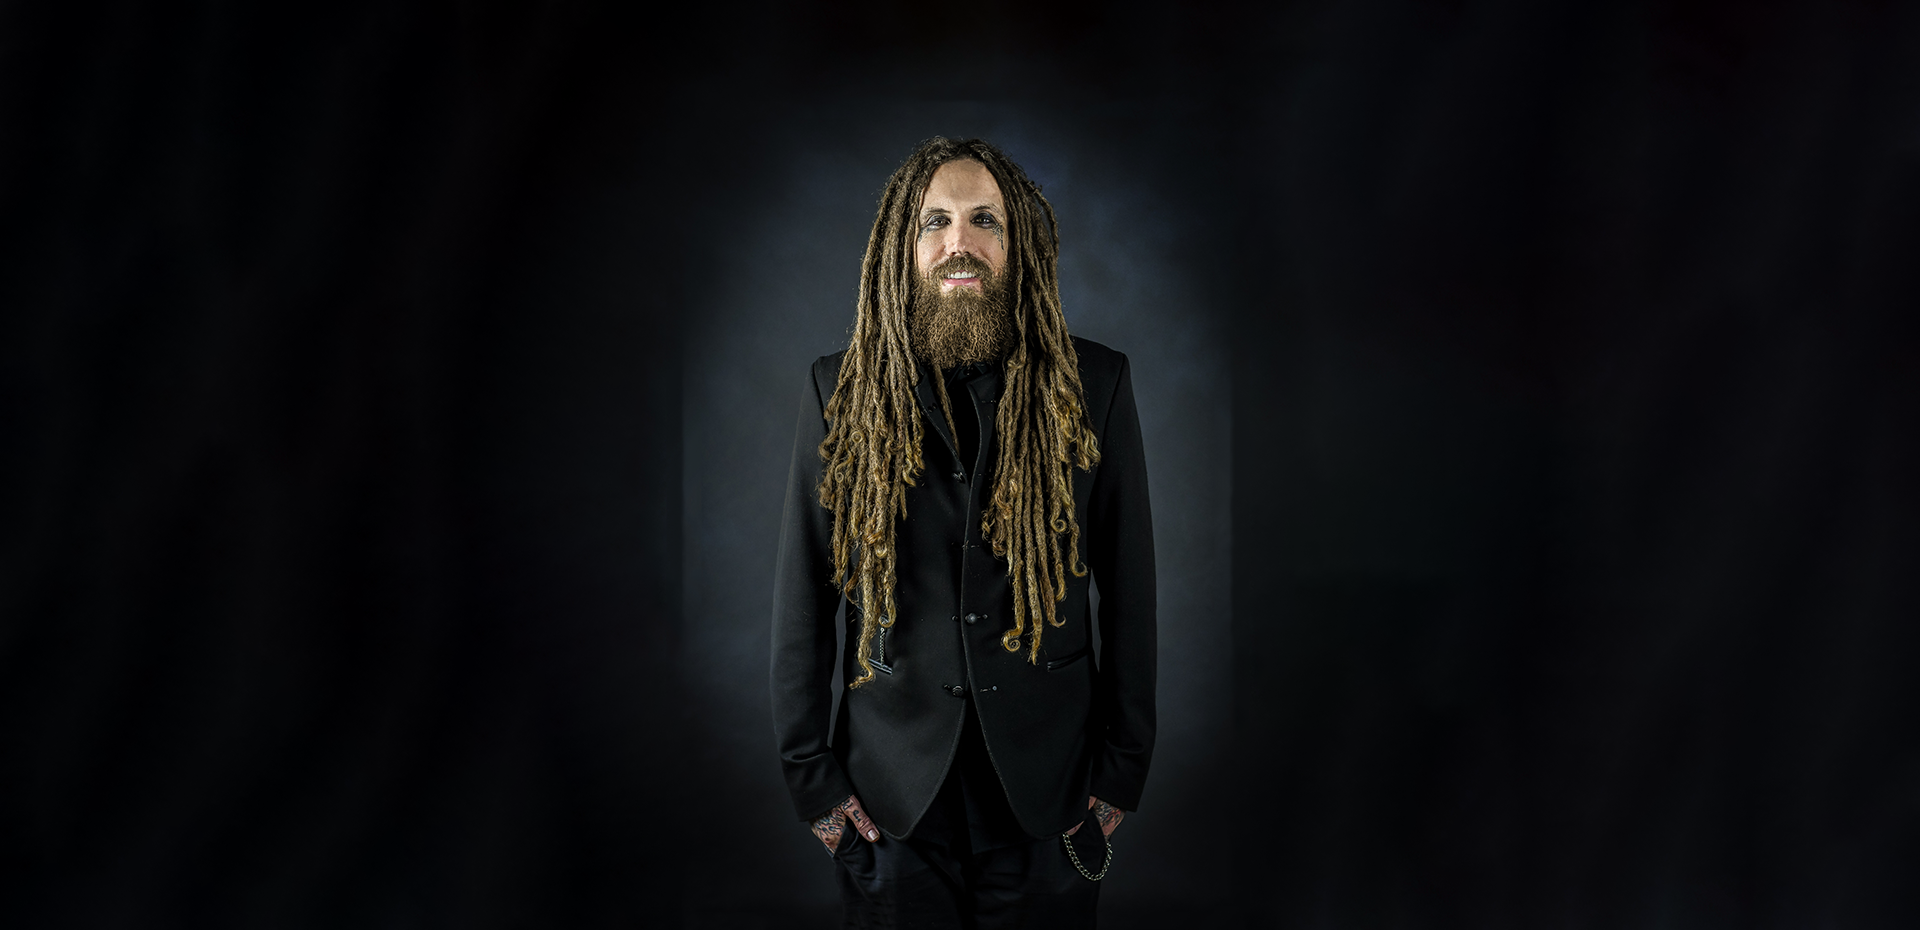 Brian "Head" Welch launches a new record label with his longtime personal manager, XOVR Records